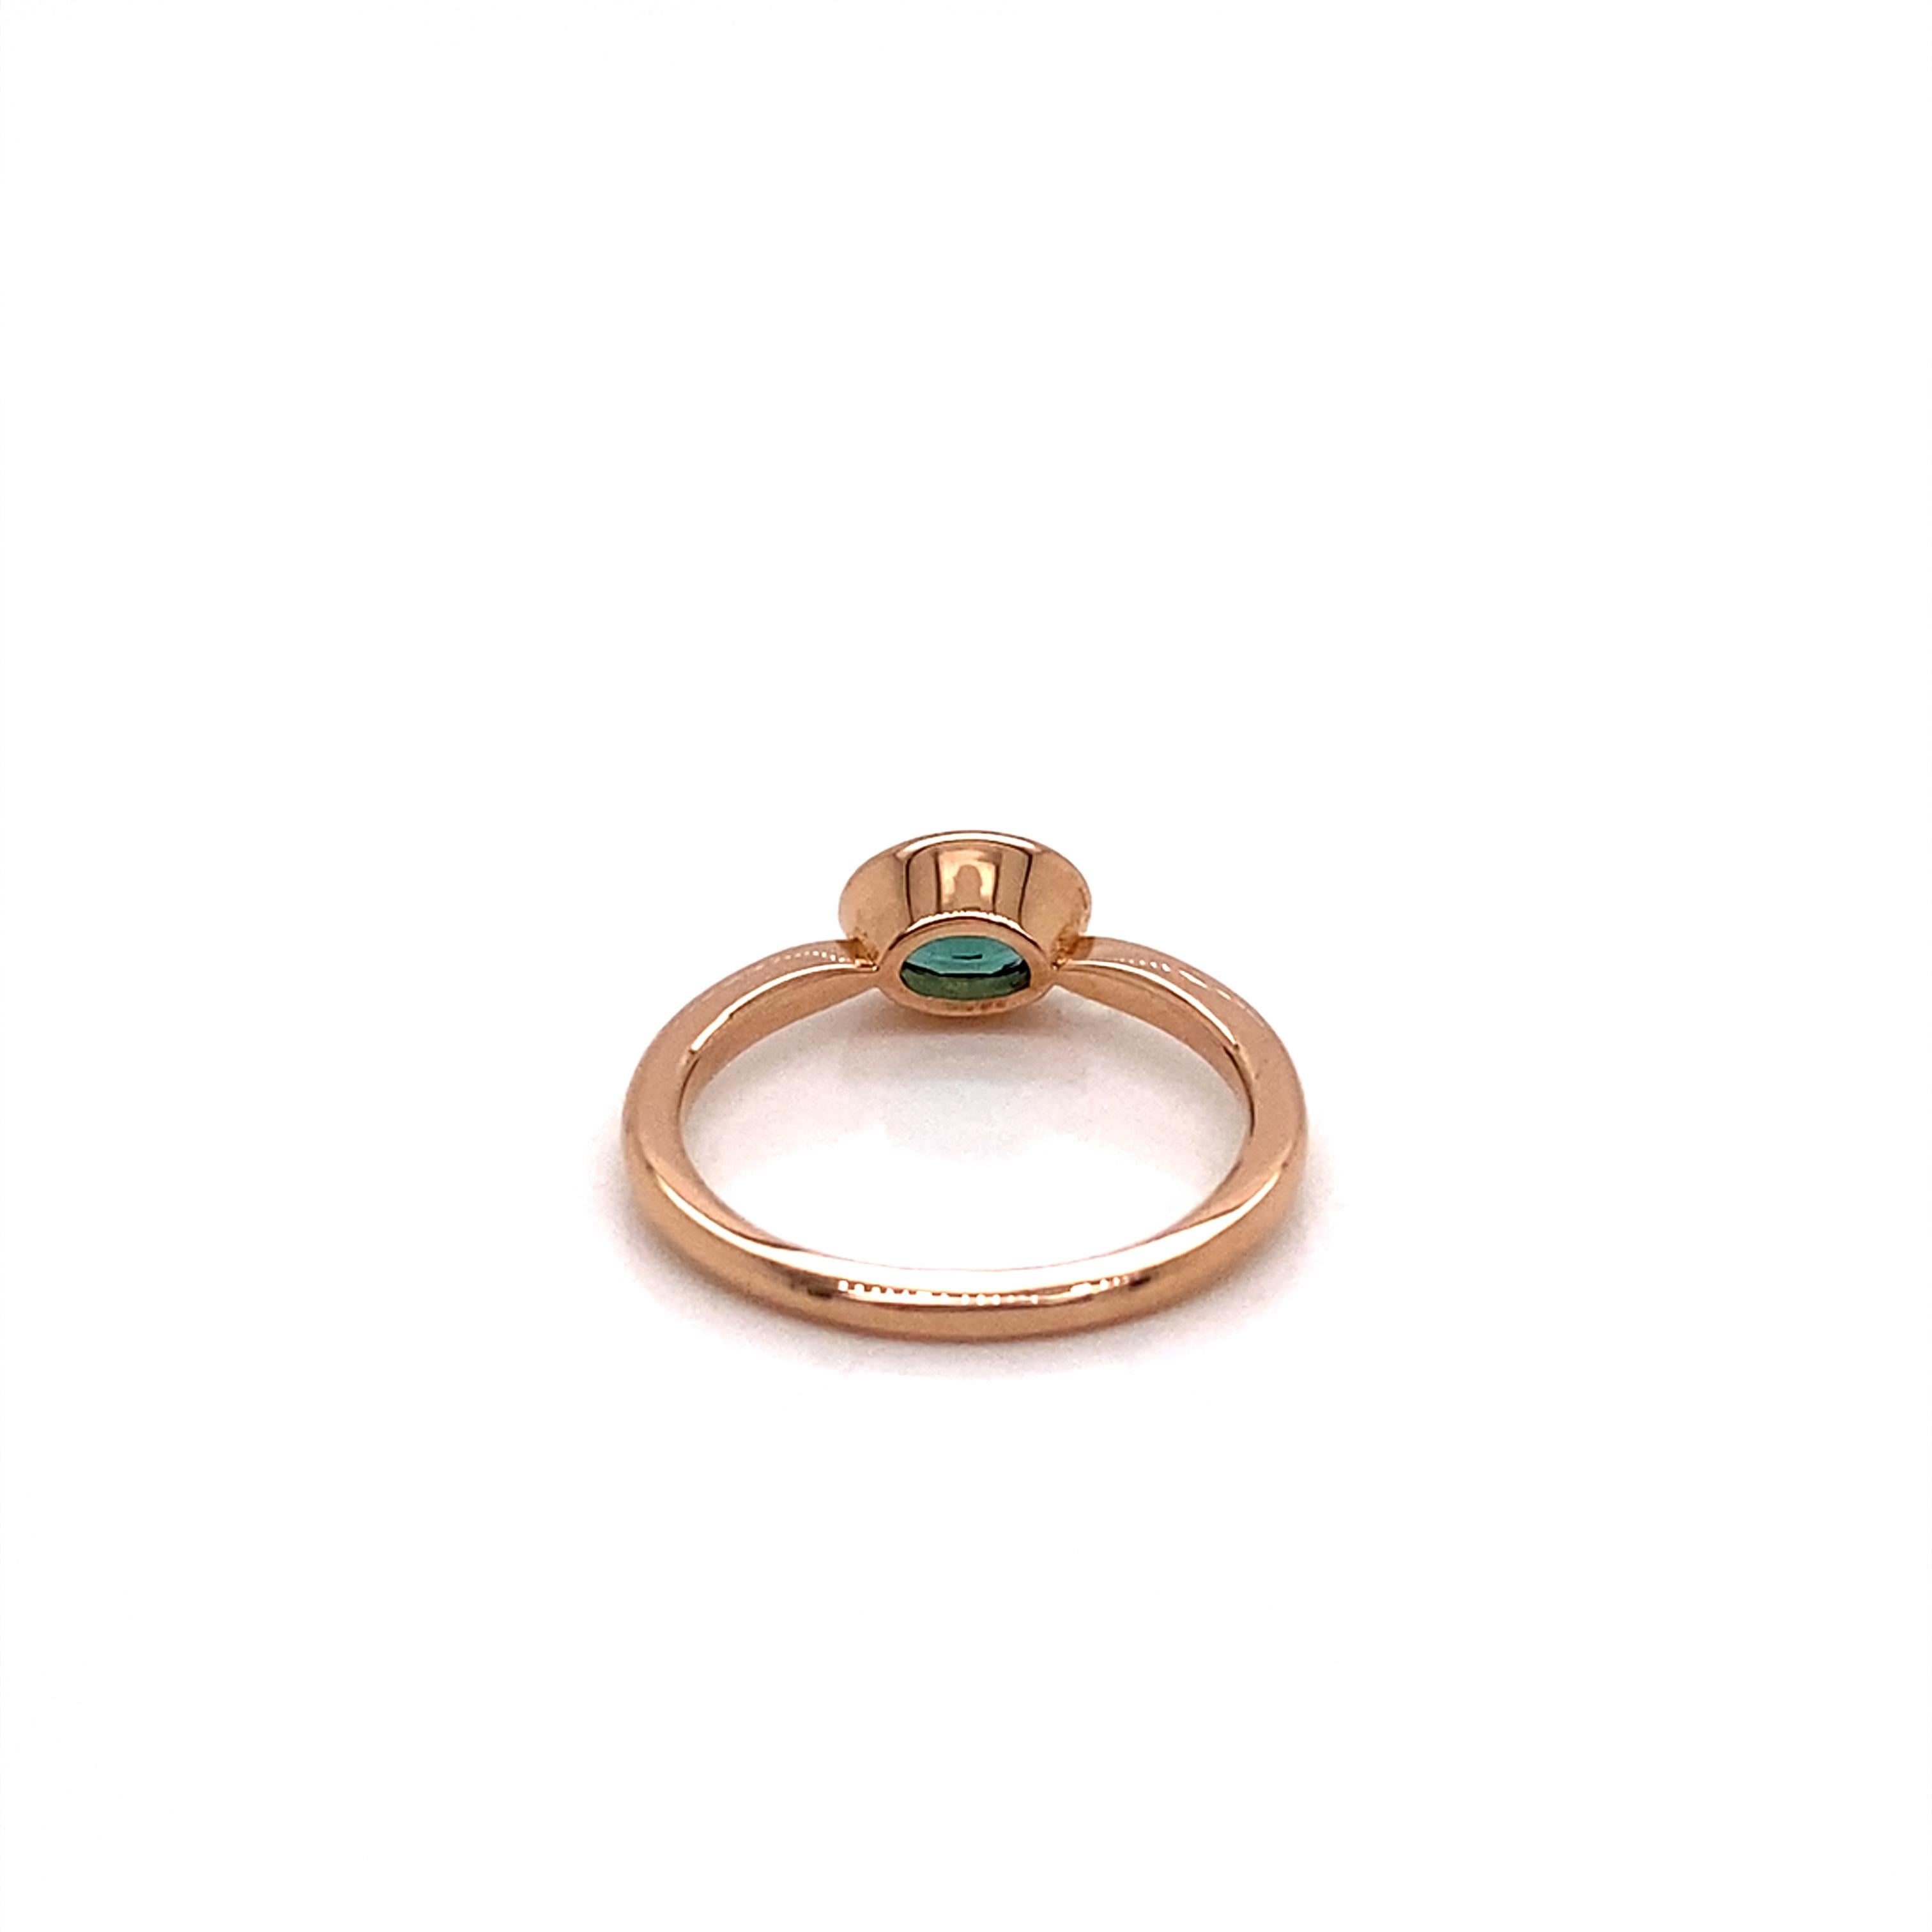 This ring features a gorgeous green oval tourmaline set in a East to West Horizontal bezel setting to create a decidedly modern and fresh aesthetic.

Perfect to be worn alone or stacked with other rings.

The Green Tourmaline was hand selected for